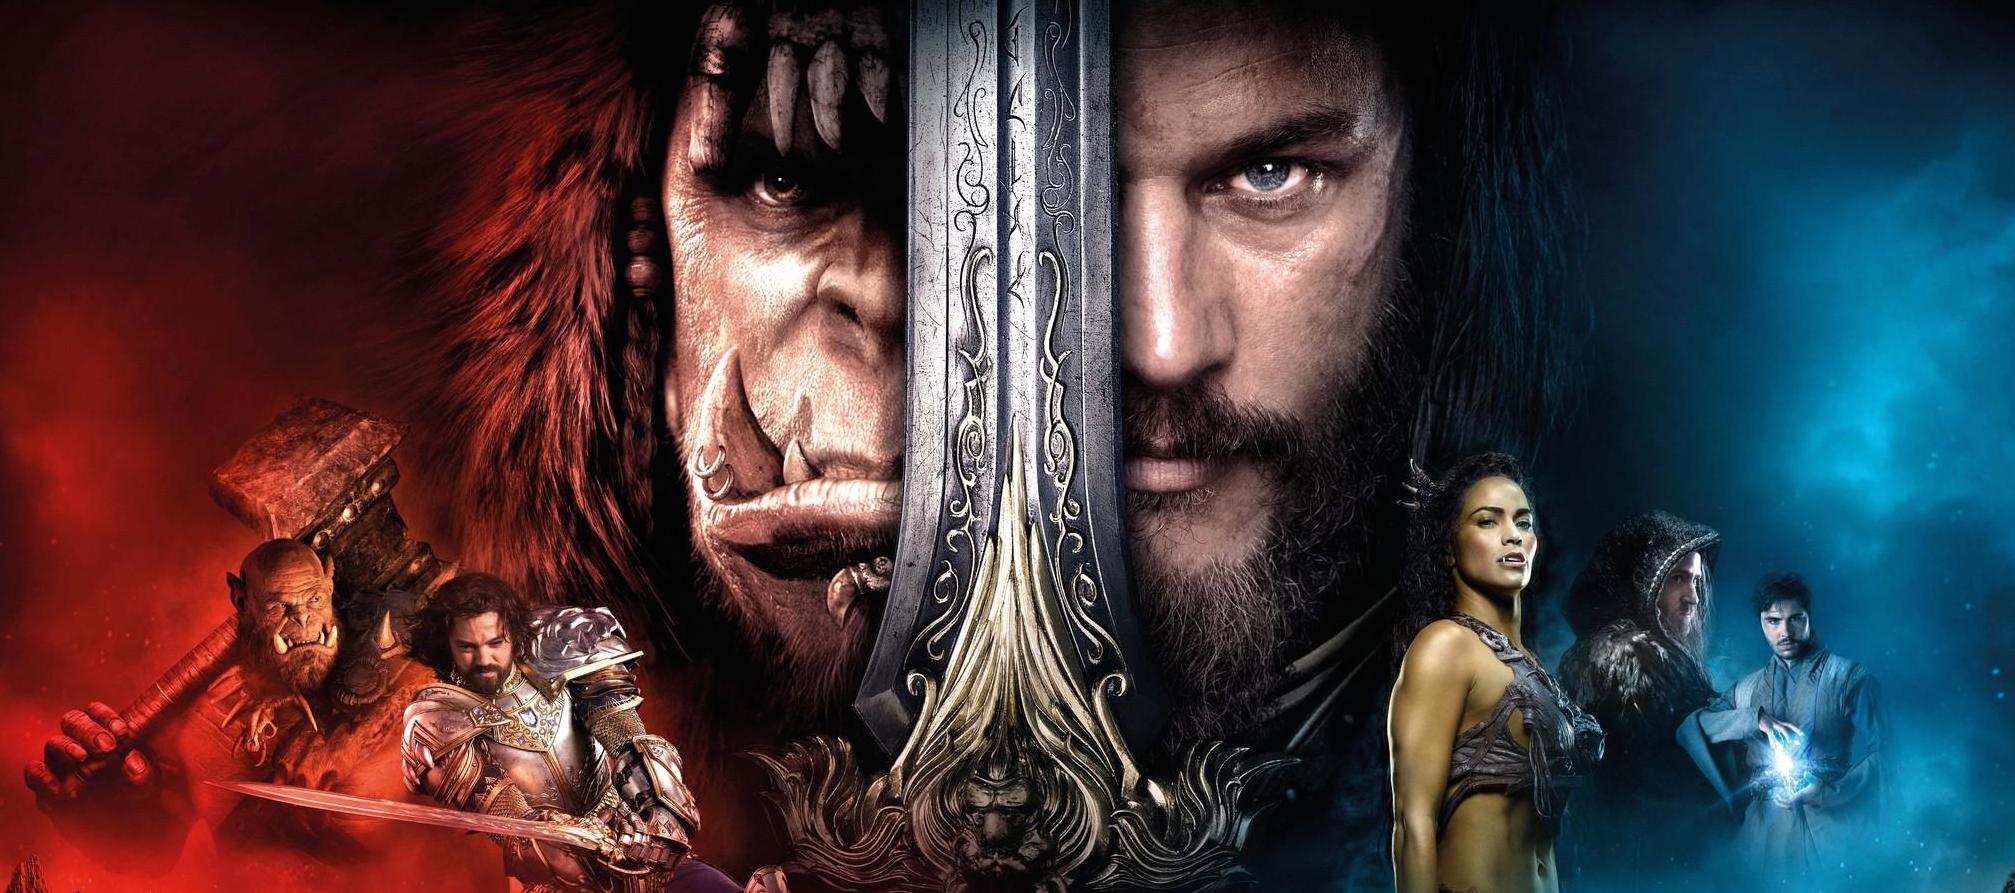 Lawsuit Claims Universal Pictures Spammed Phones With Unsolicited ‘Warcraft’ Texts